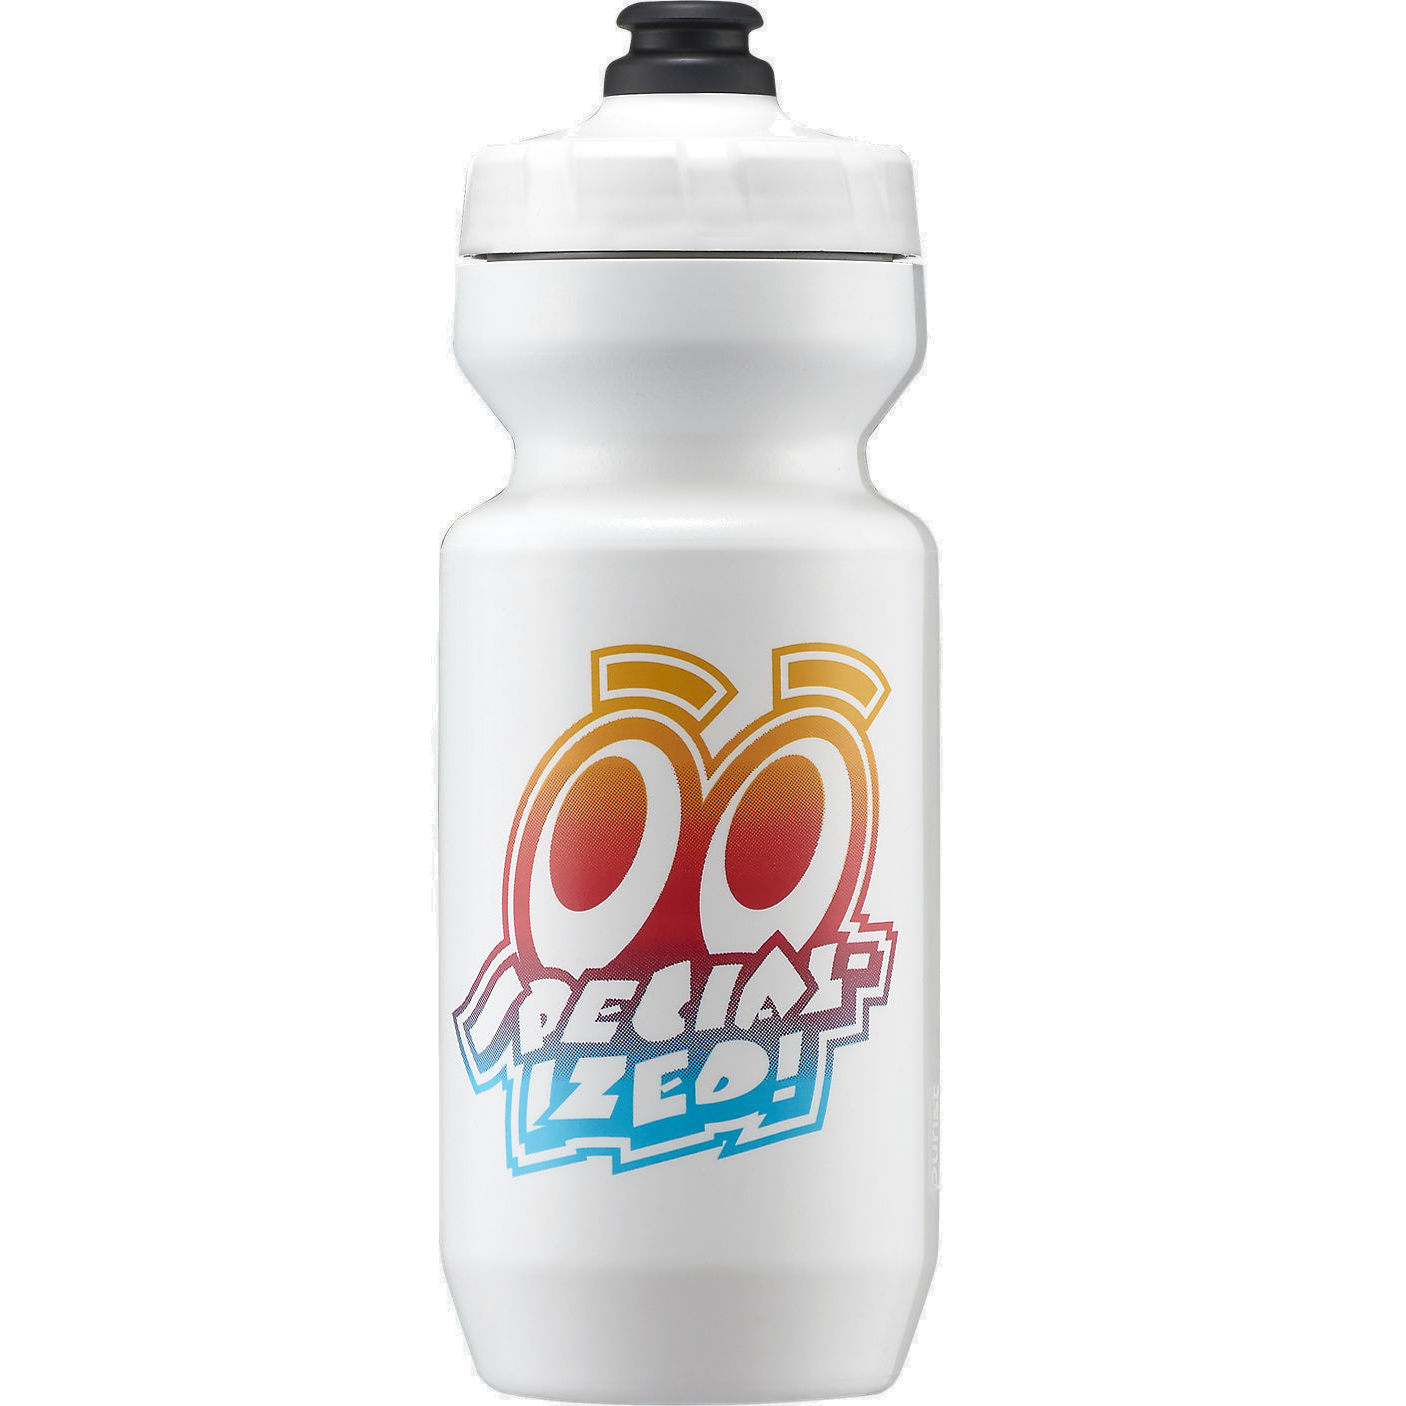 Picture of Specialized Eyes Purist MoFlo Bottle 650ml - White